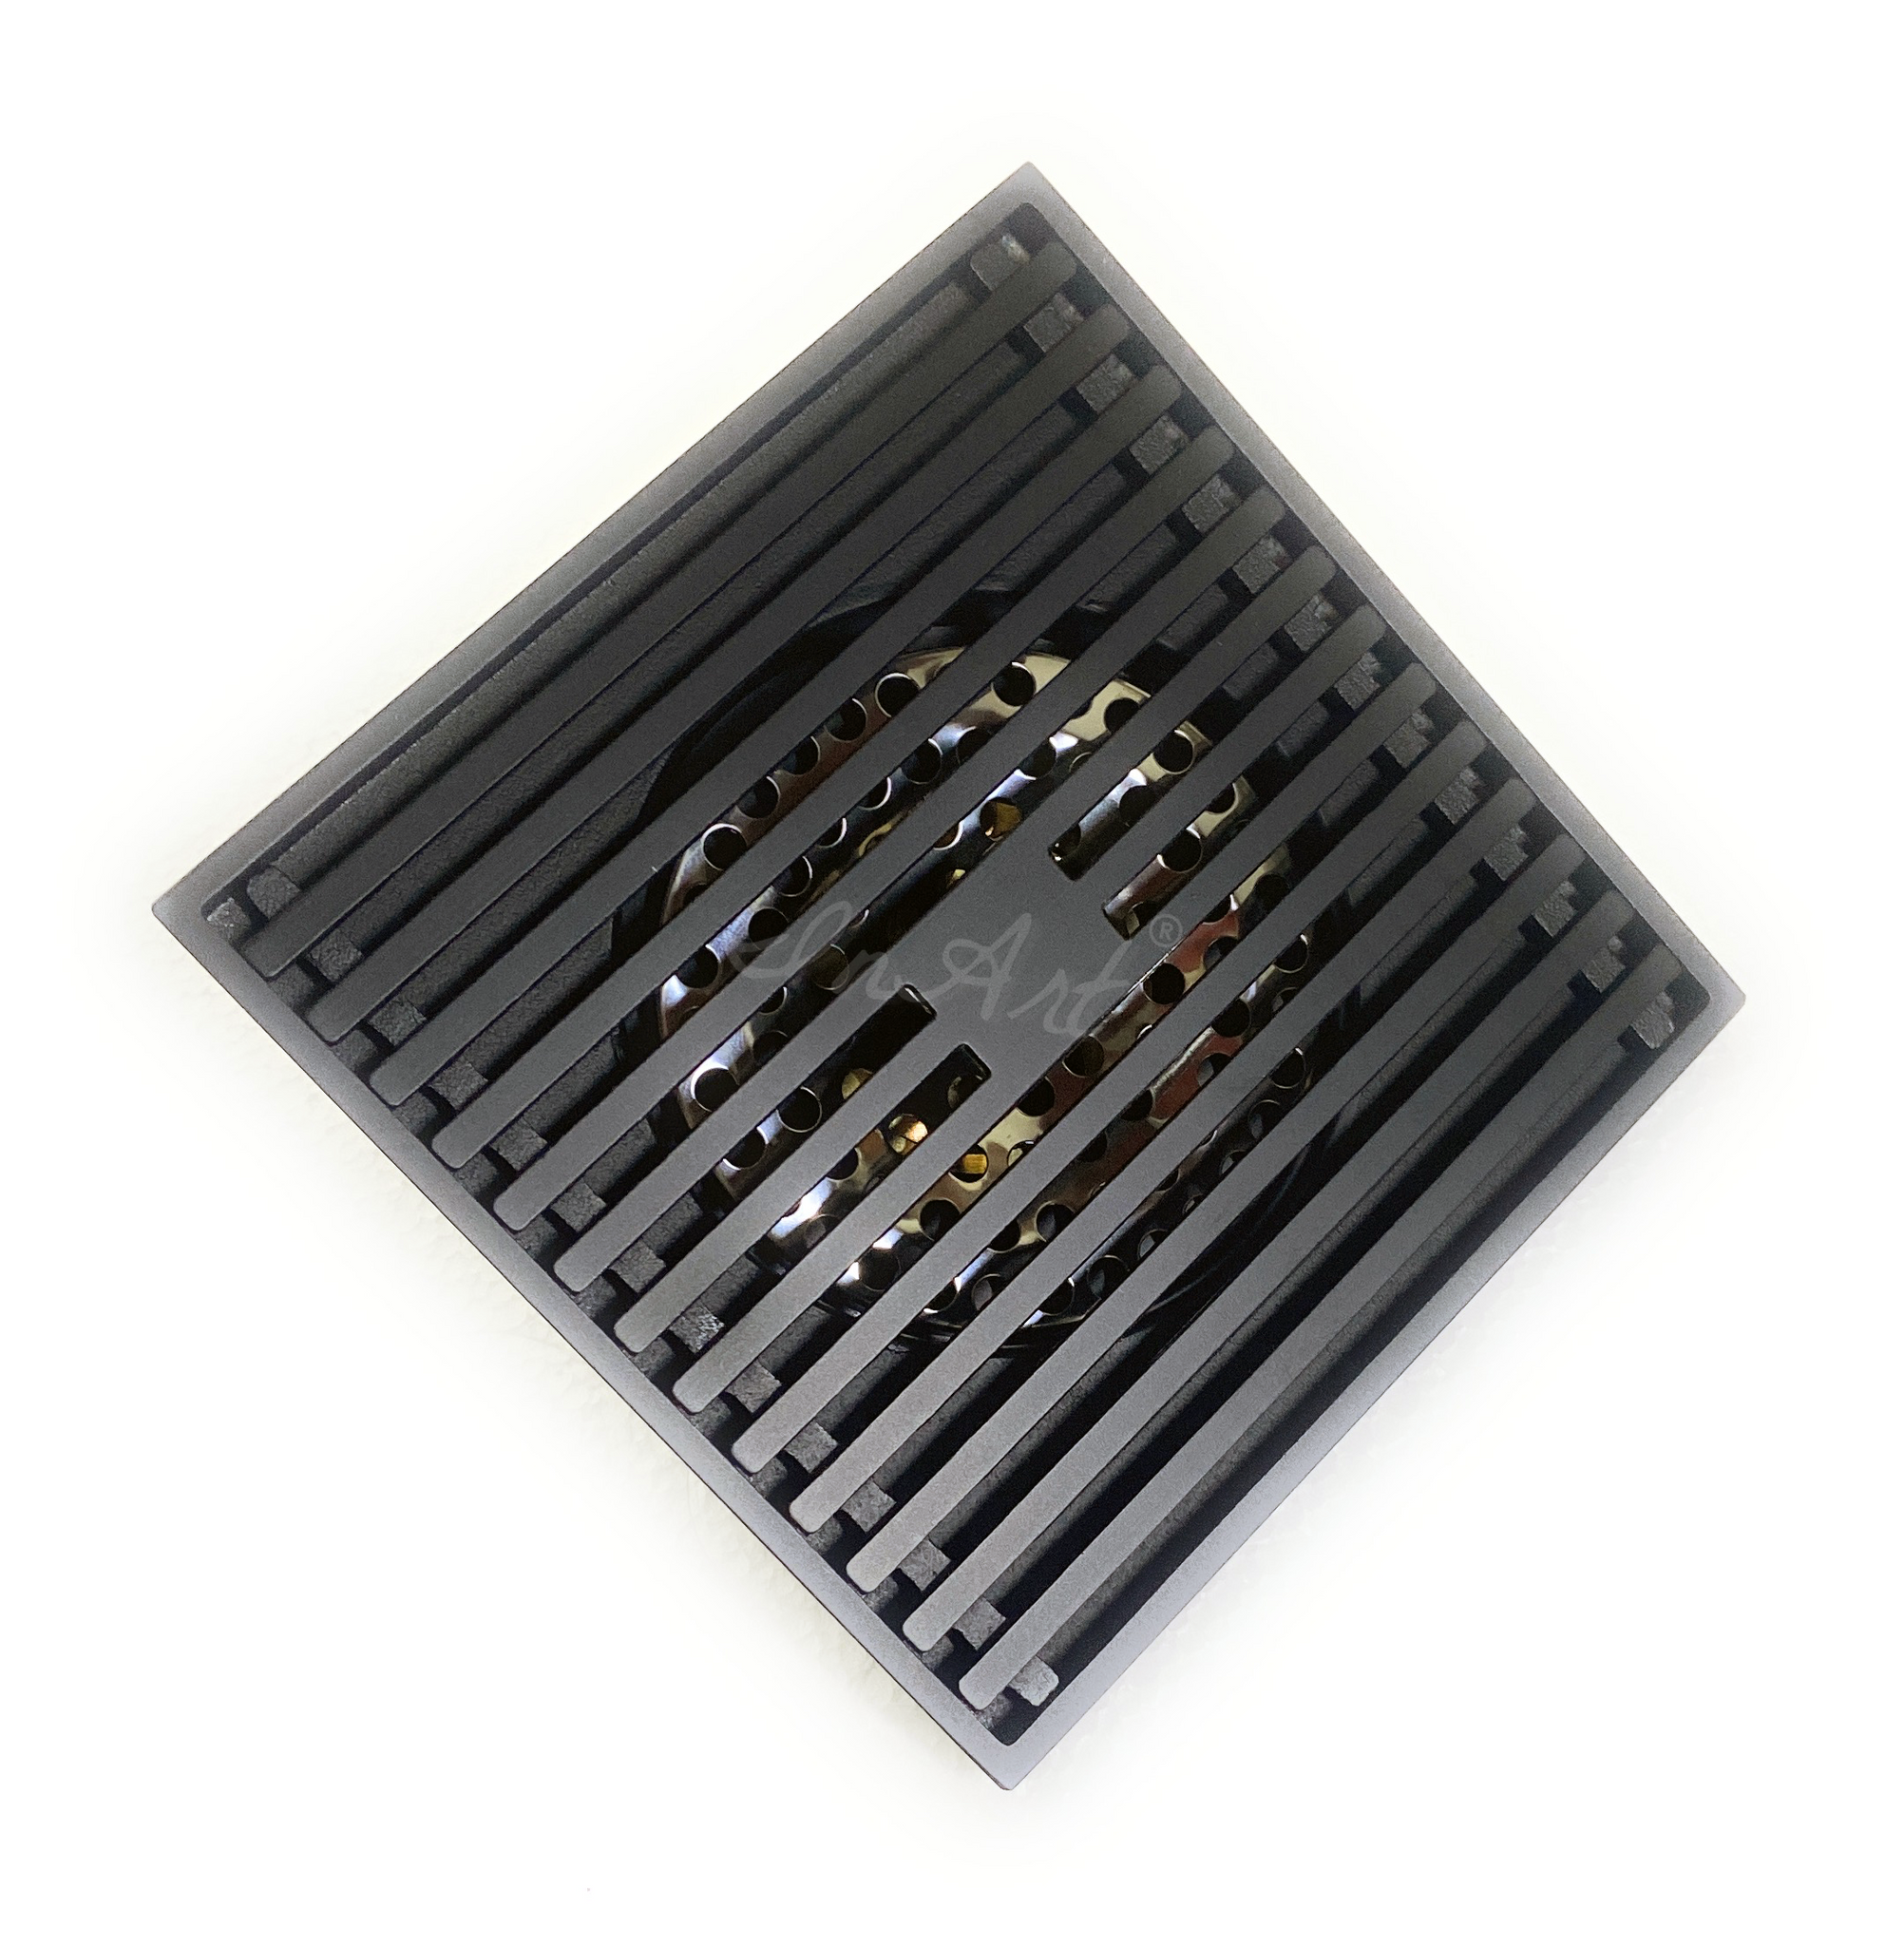 InArt Brass Square Shower Floor Drain with Removable Cover Grid Grate 5 inch Long Black Matt Color